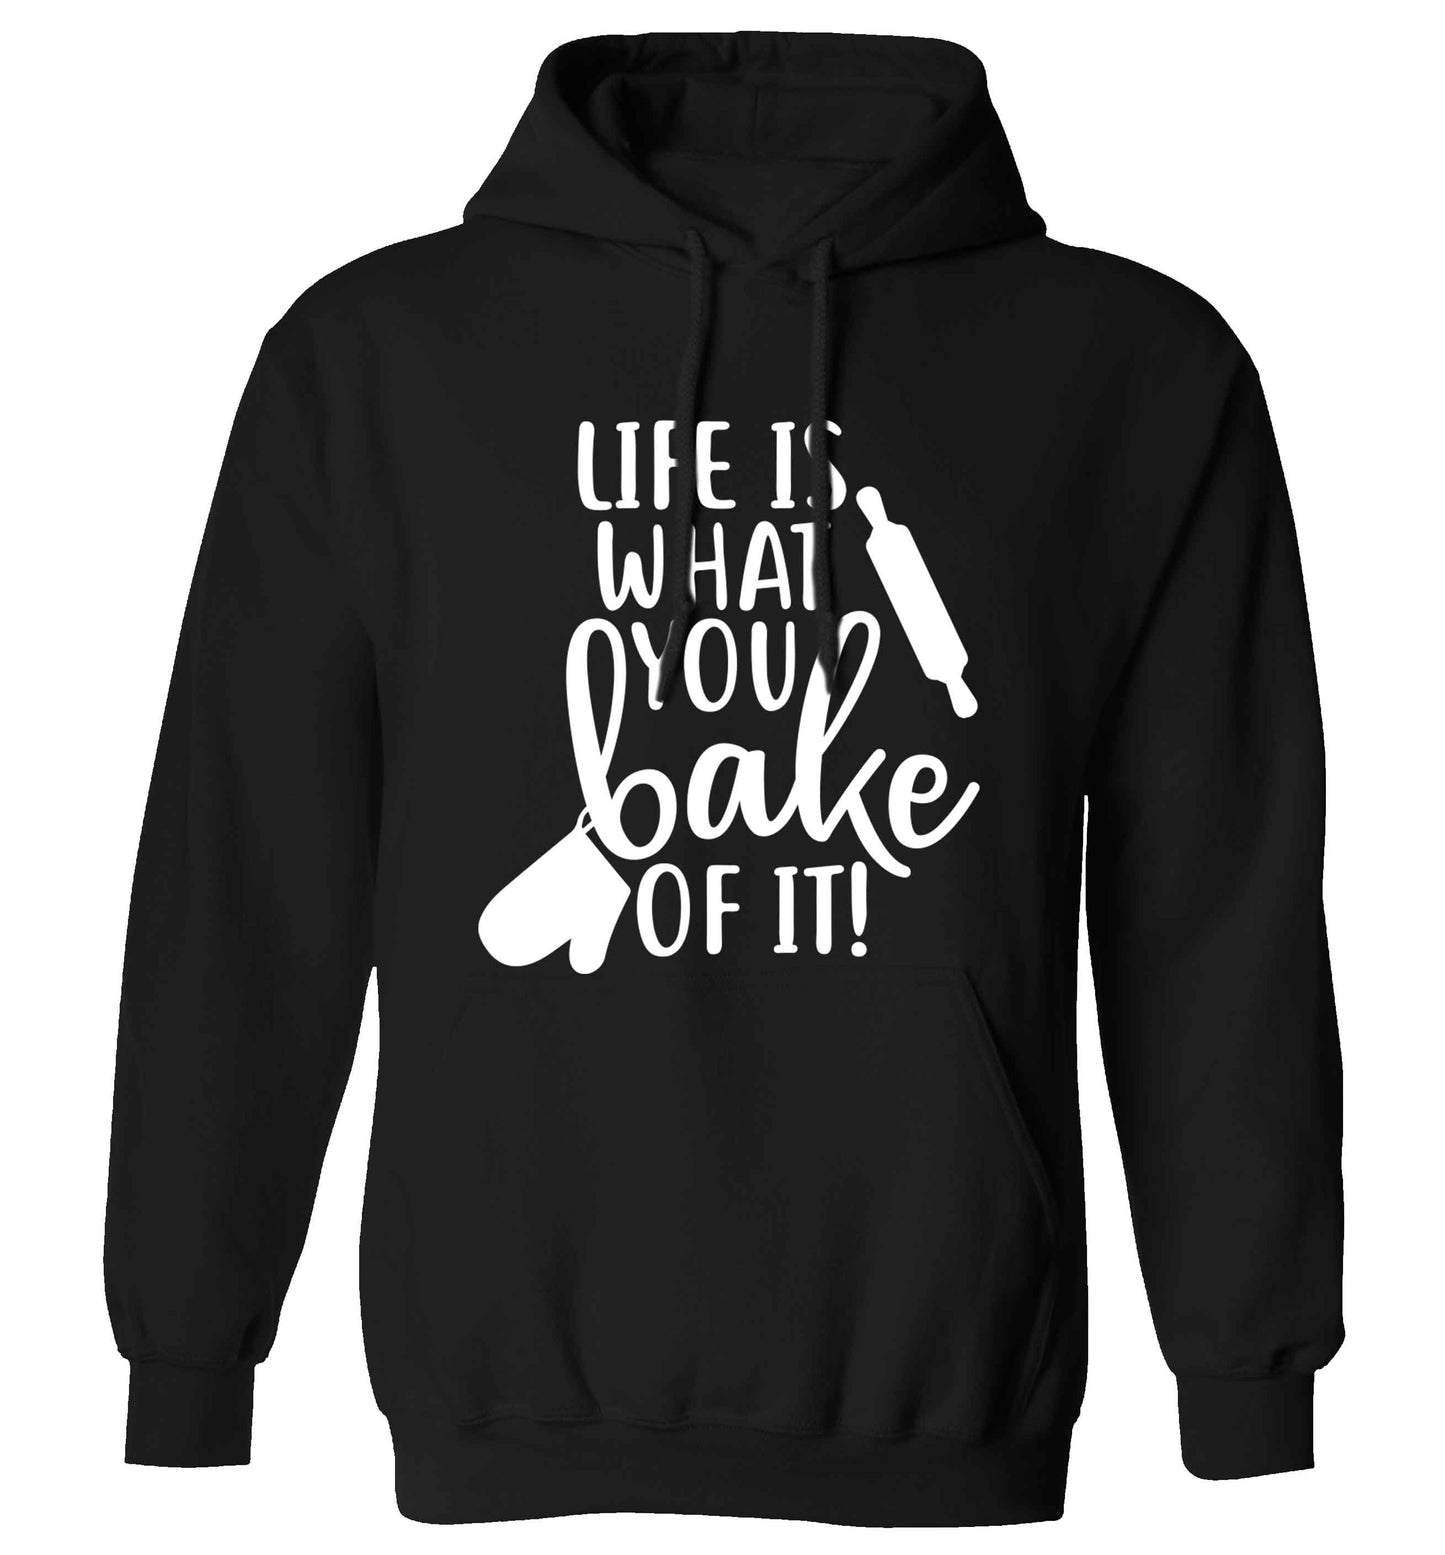 Life is what you bake of it adults unisex black hoodie 2XL